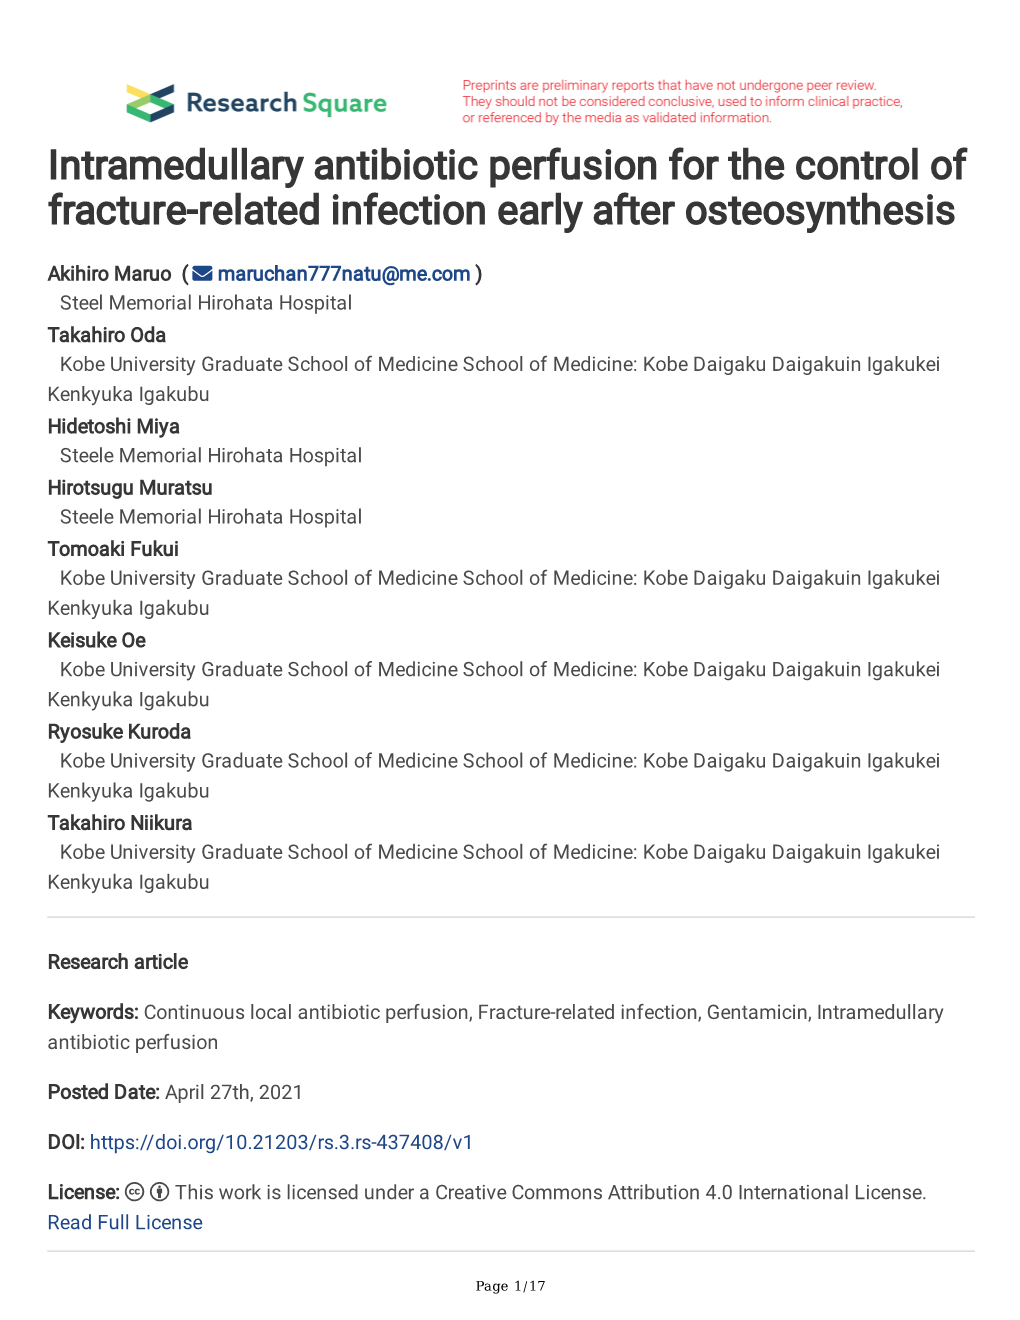 Intramedullary Antibiotic Perfusion for the Control of Fracture-Related Infection Early After Osteosynthesis